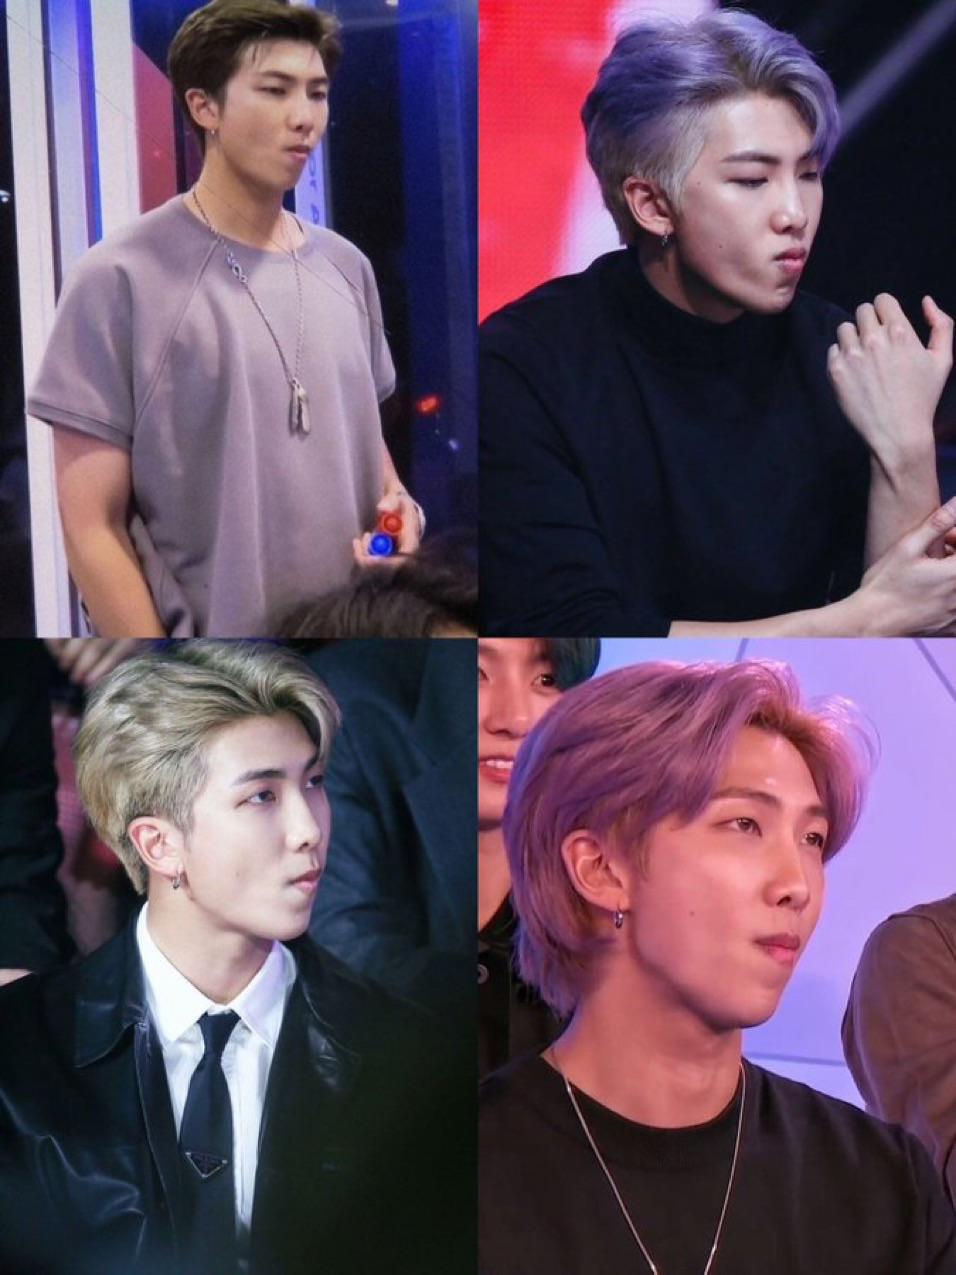 What did you do to make Namjoon clench his jaw? 😏